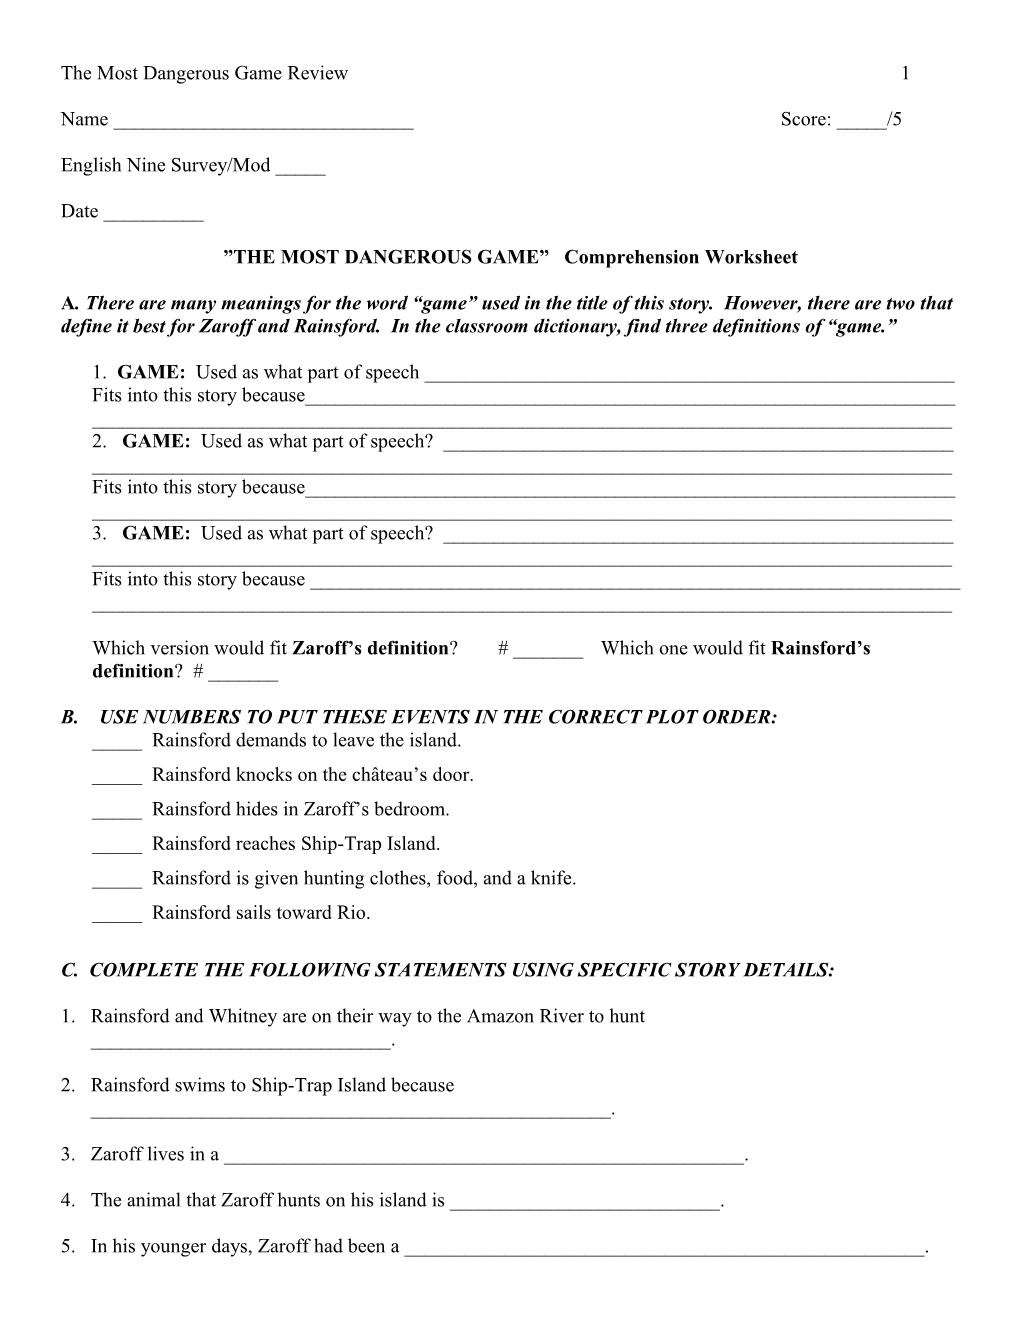 ”THE MOST DANGEROUS GAME” Comprehension Worksheet